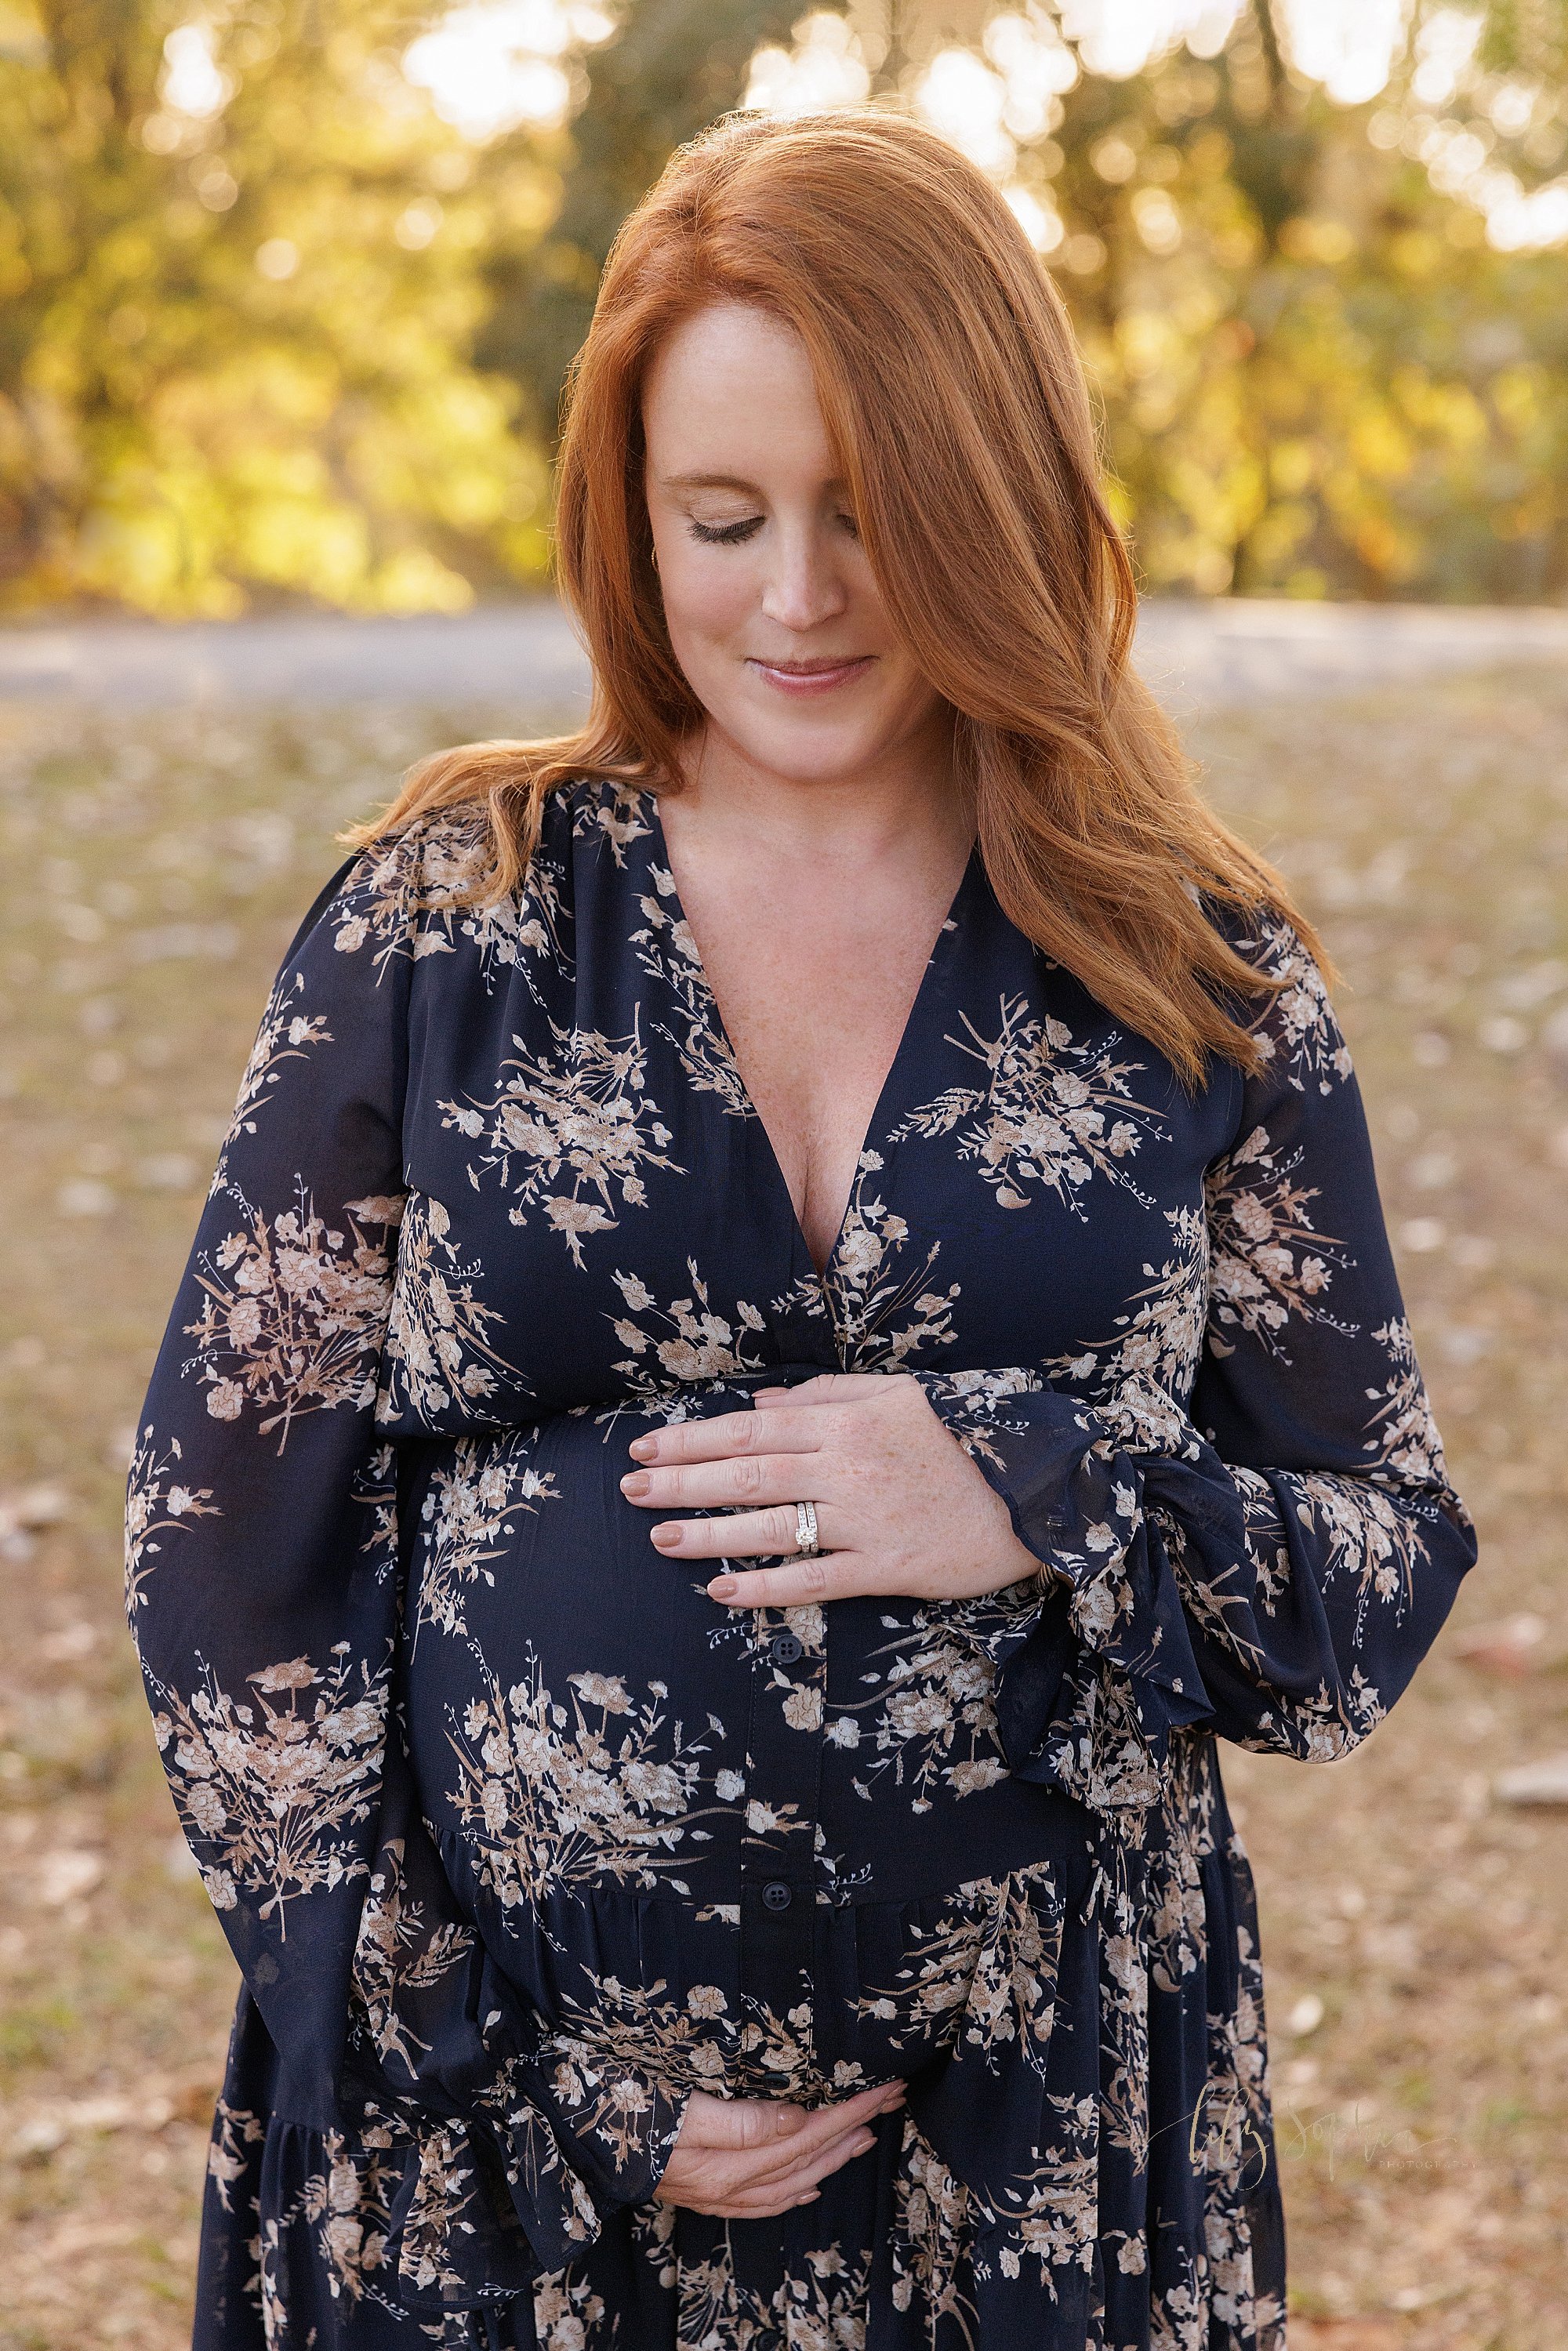 intown-atlanta-decatur-brookhaven-buckhead-outdoor-fall-pictures-family-maternity-photoshoot_5568.jpg